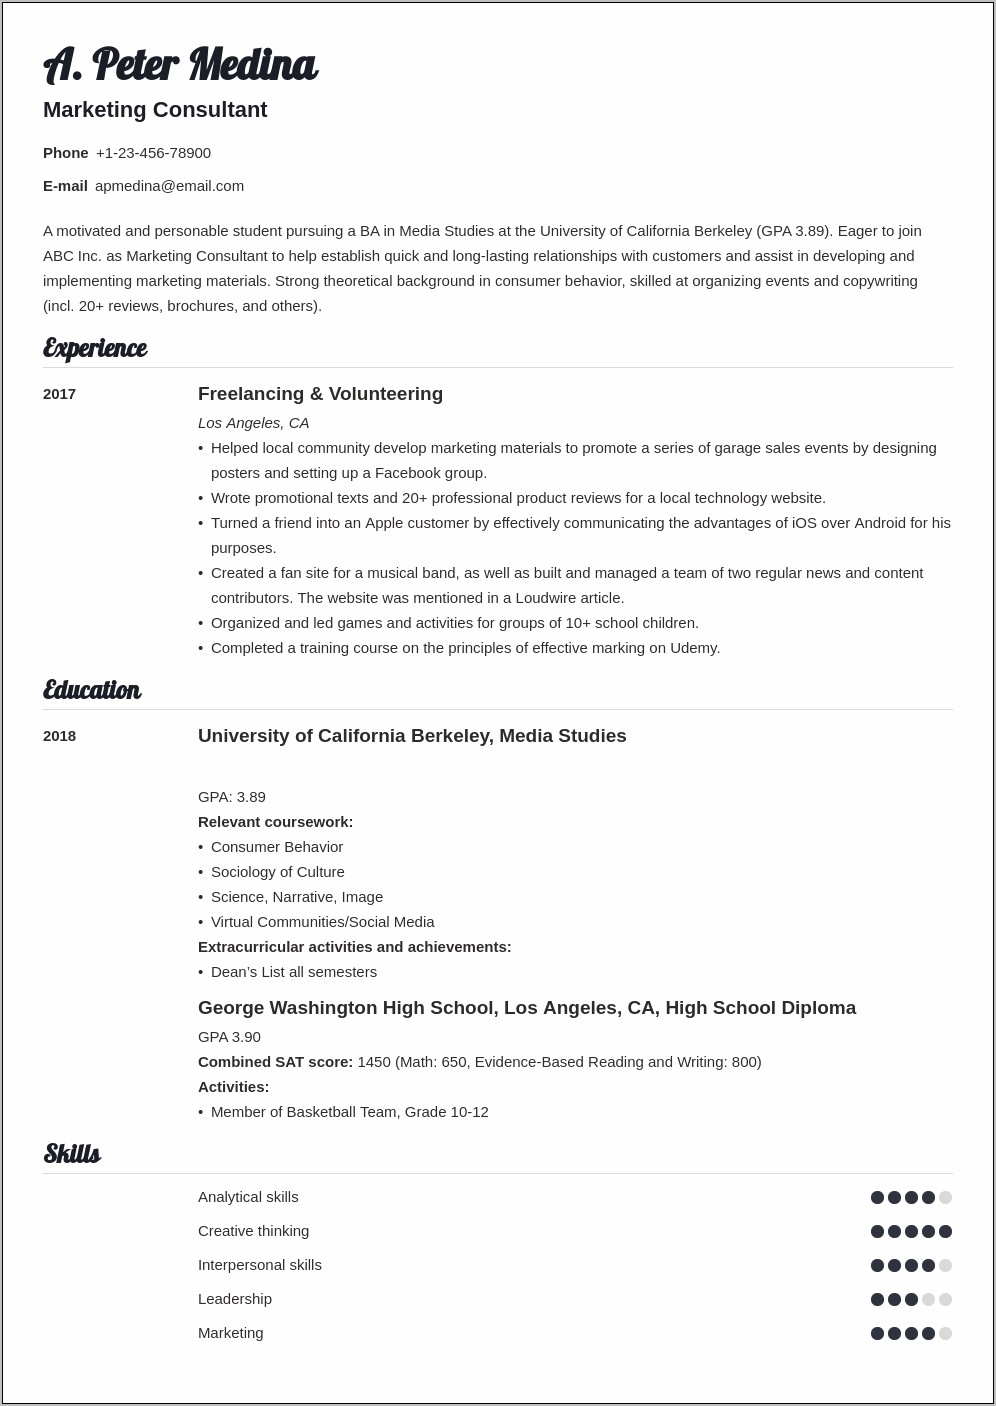 Resume Education Of Job Experince First